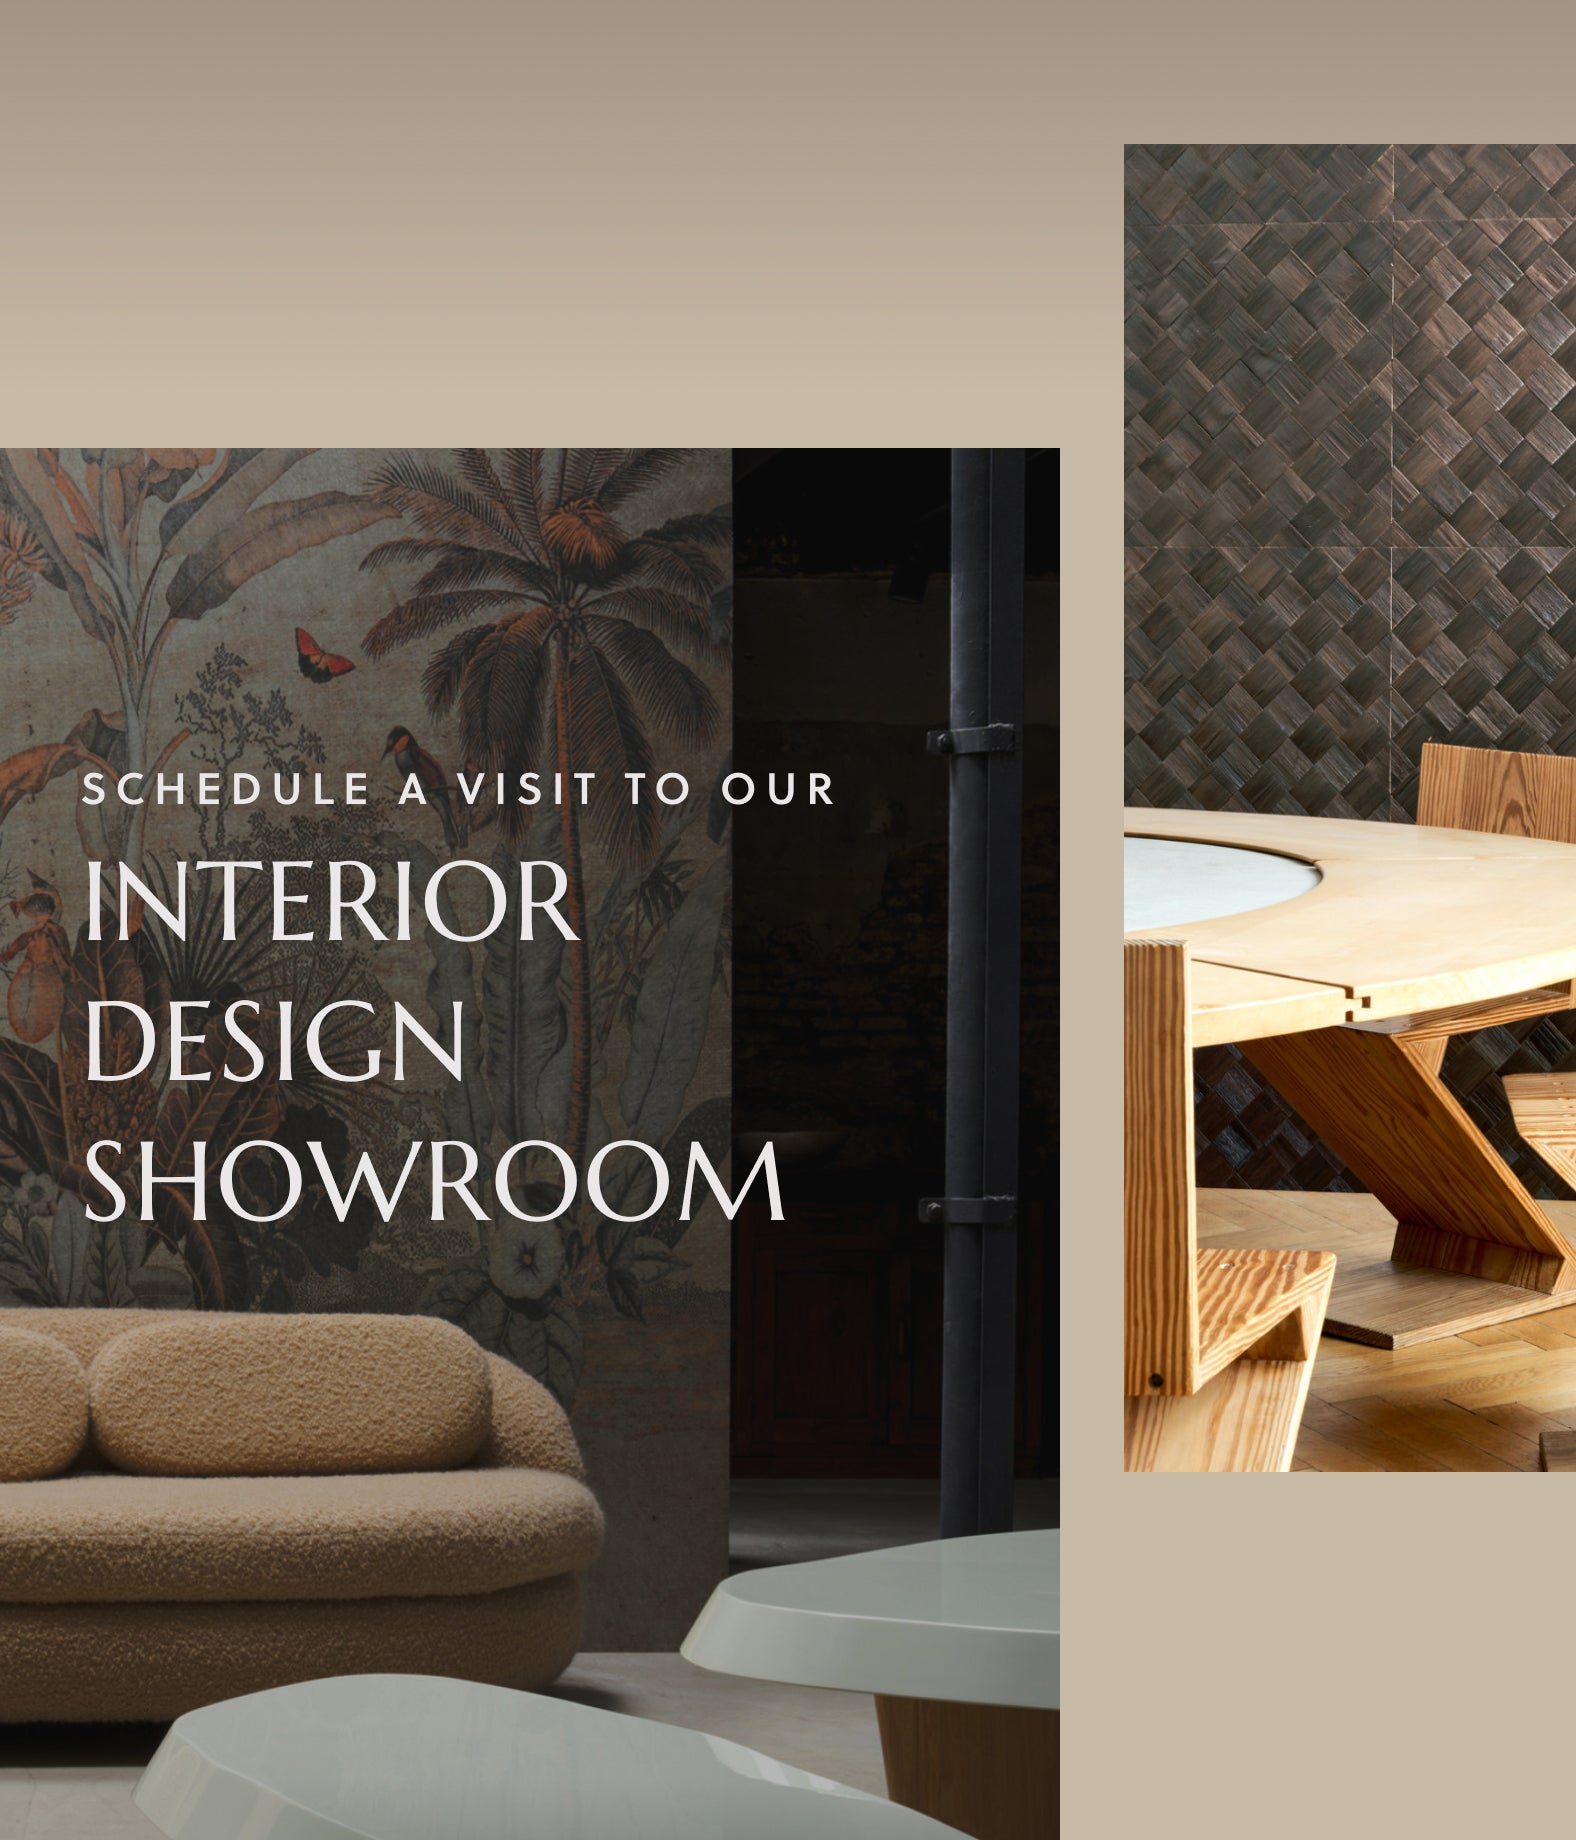 Stylish Banner Display: One captivating image showcases a chic tan bouclé sofa against a backdrop of lush jungle-style wallpaper, while the other reveals an inviting oak dining room table complemented by textured dark checkered tonal wallpaper.